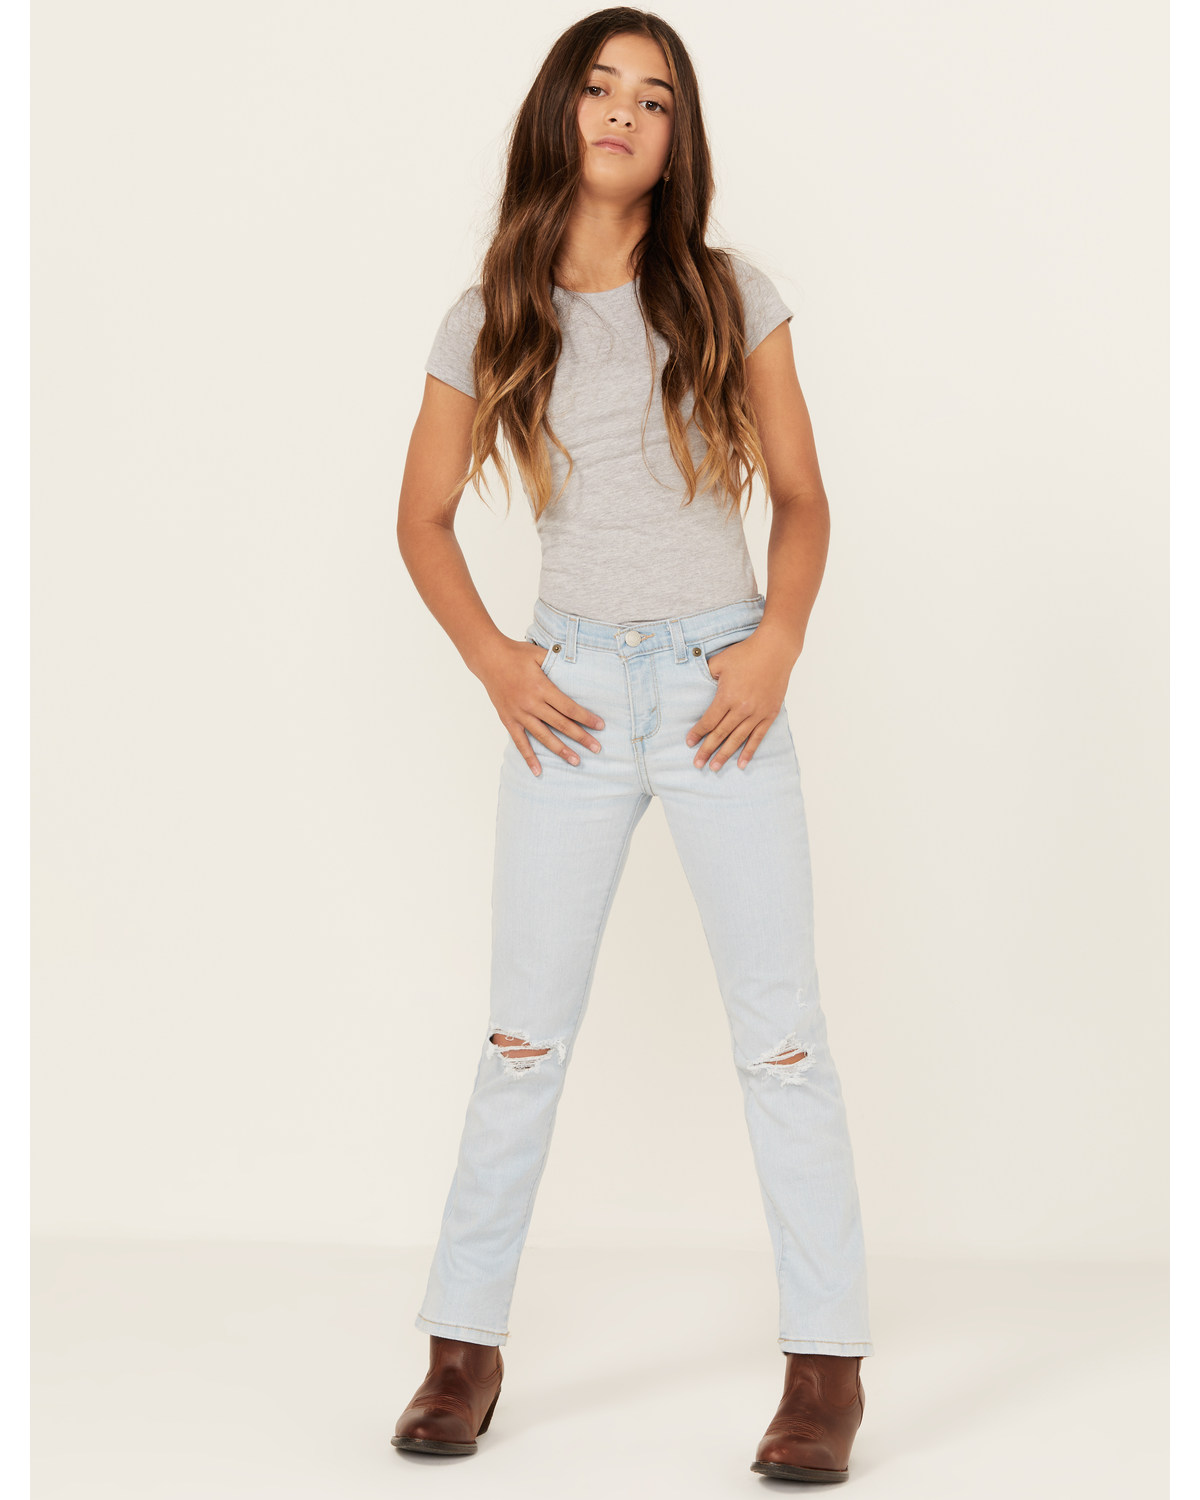 Levi's Girls' Light Wash Afterglow Classic Bootcut Jeans